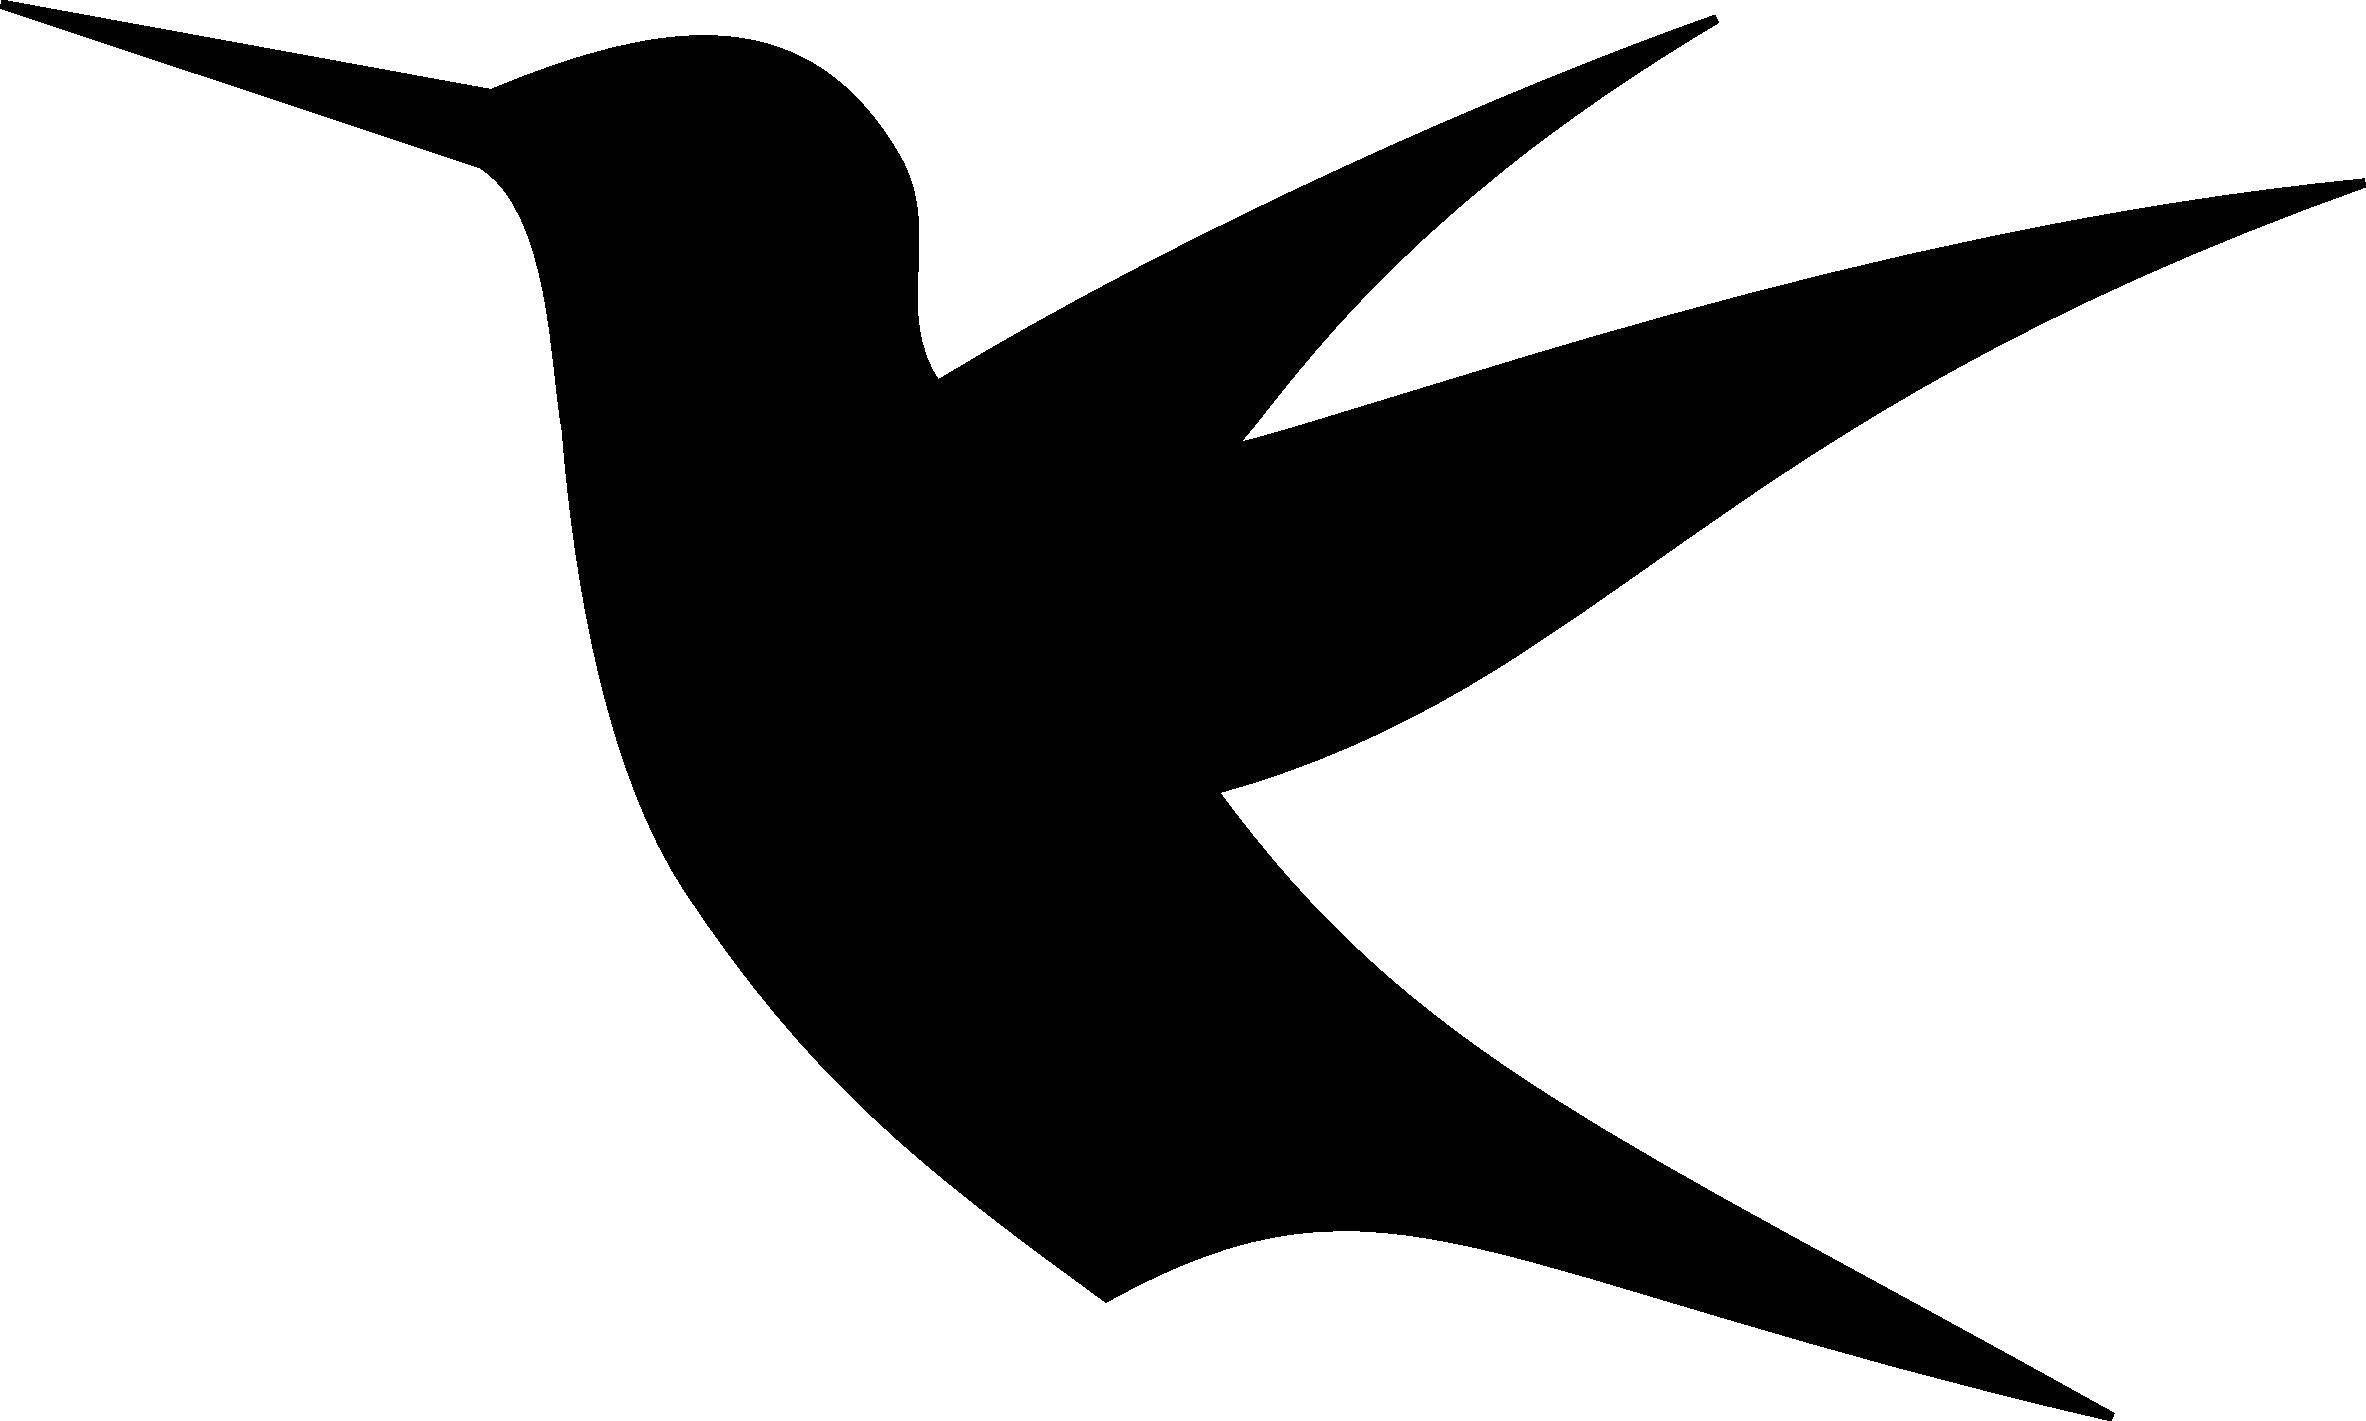 Coloring Silhouette of a swallow or a Hummingbird. Category The contours of birds. Tags:  swallow .